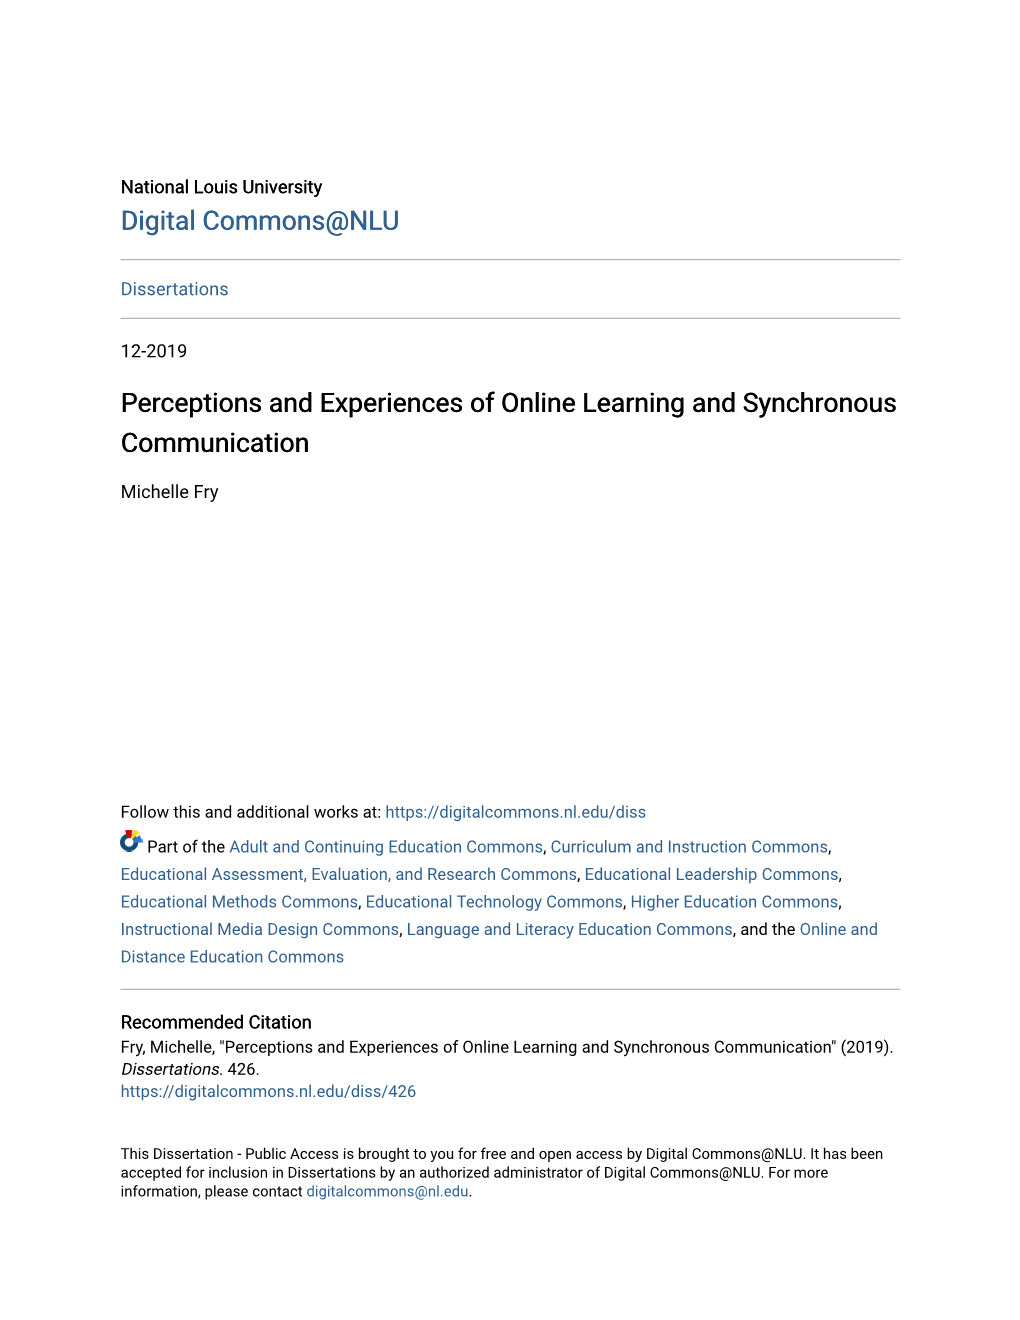 Perceptions and Experiences of Online Learning and Synchronous Communication